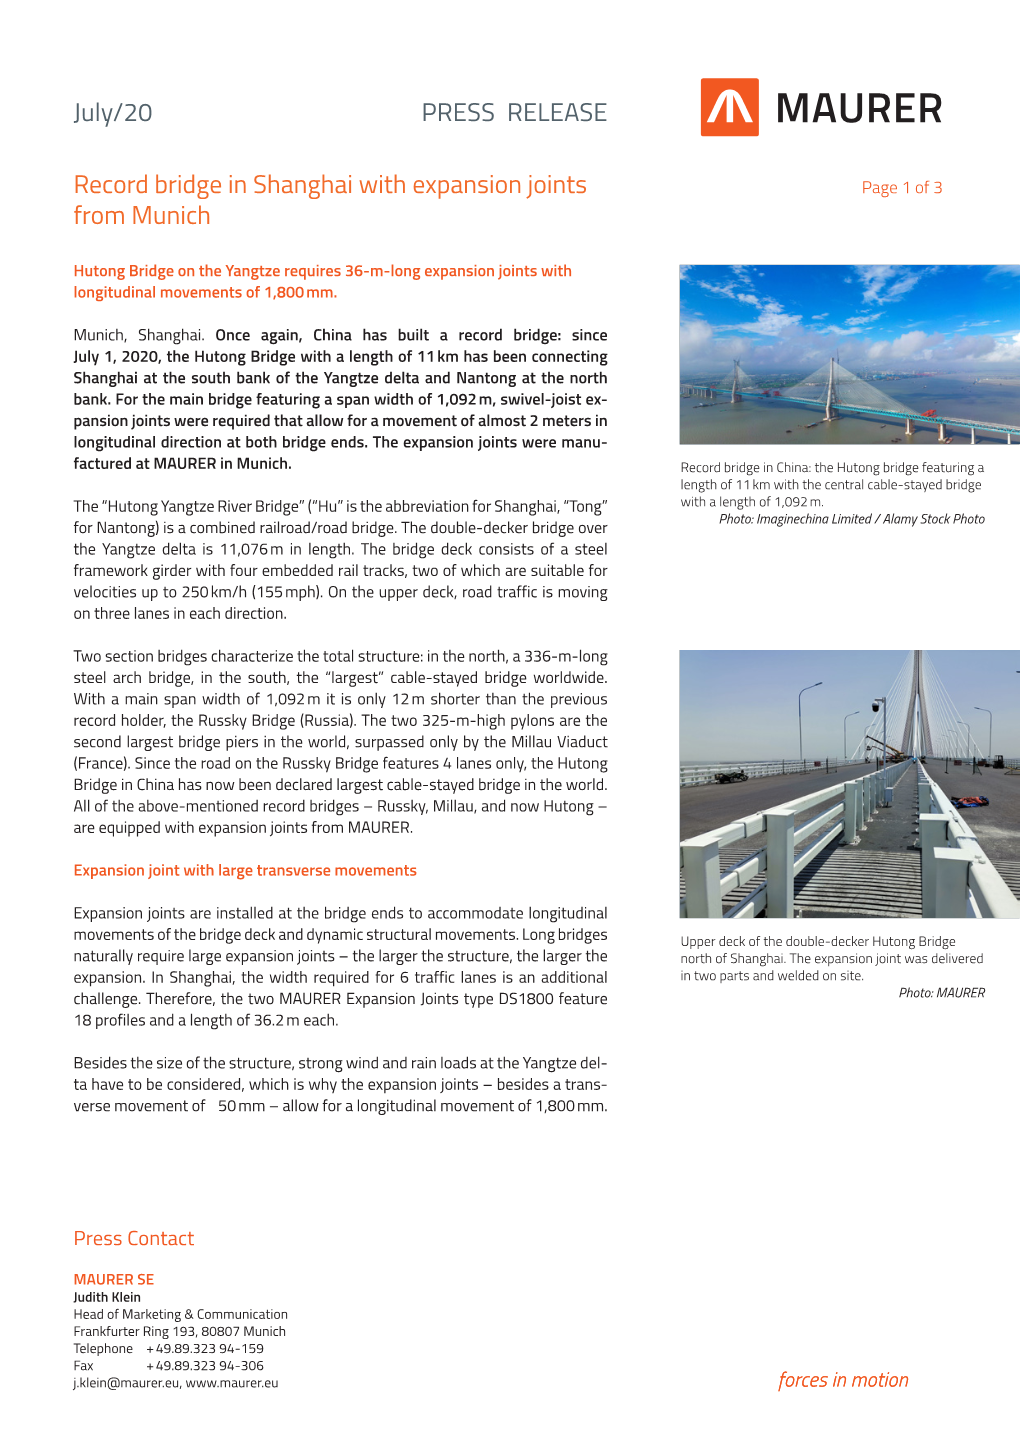 Record Bridge in Shanghai with Expansion Joints from Munich July